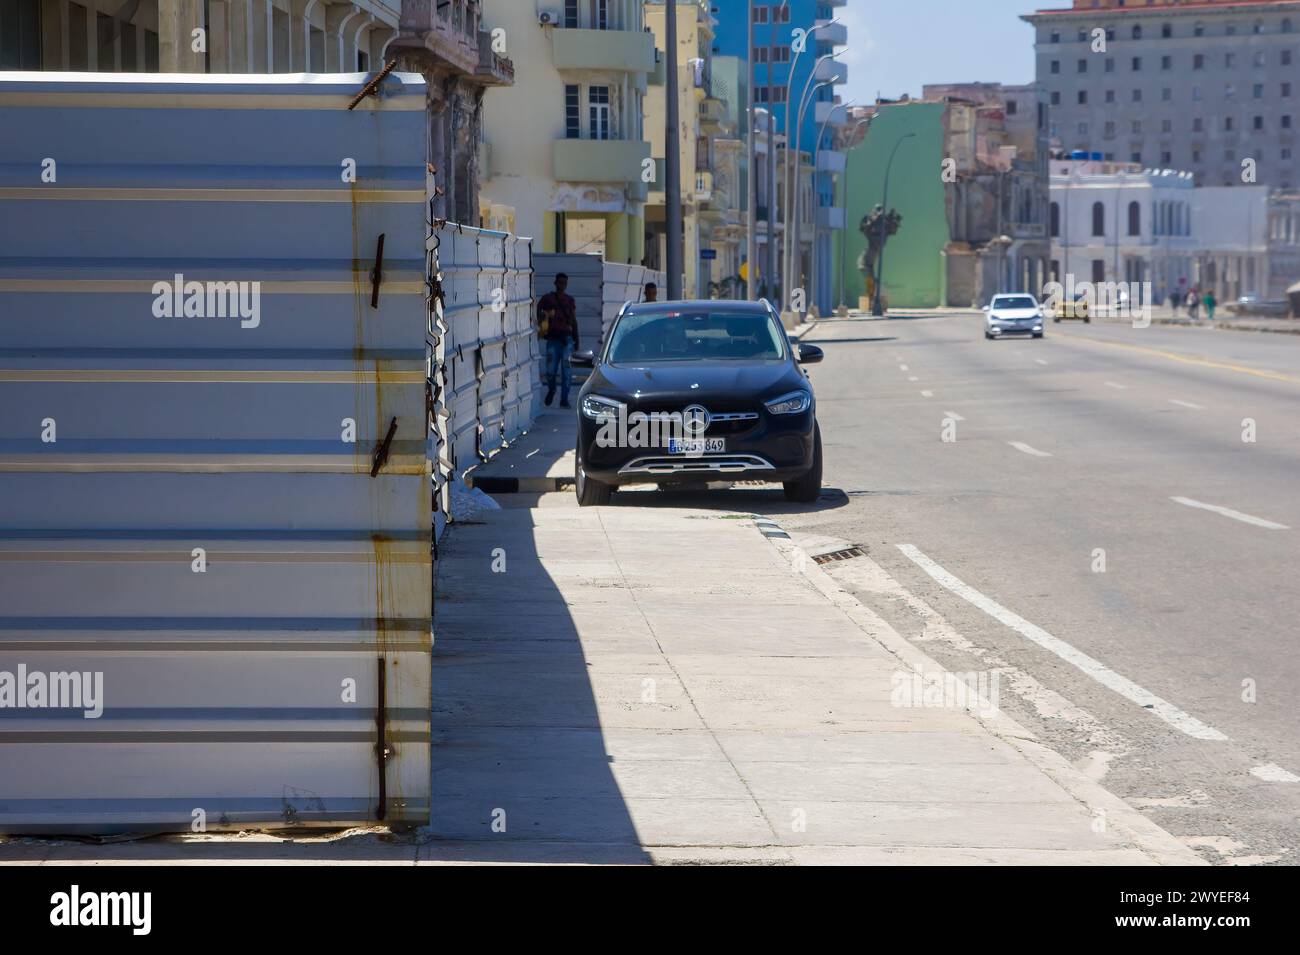 Construction fence and a Mercedes Benz car parked in the sidewalk, Havana, Cuba Stock Photo